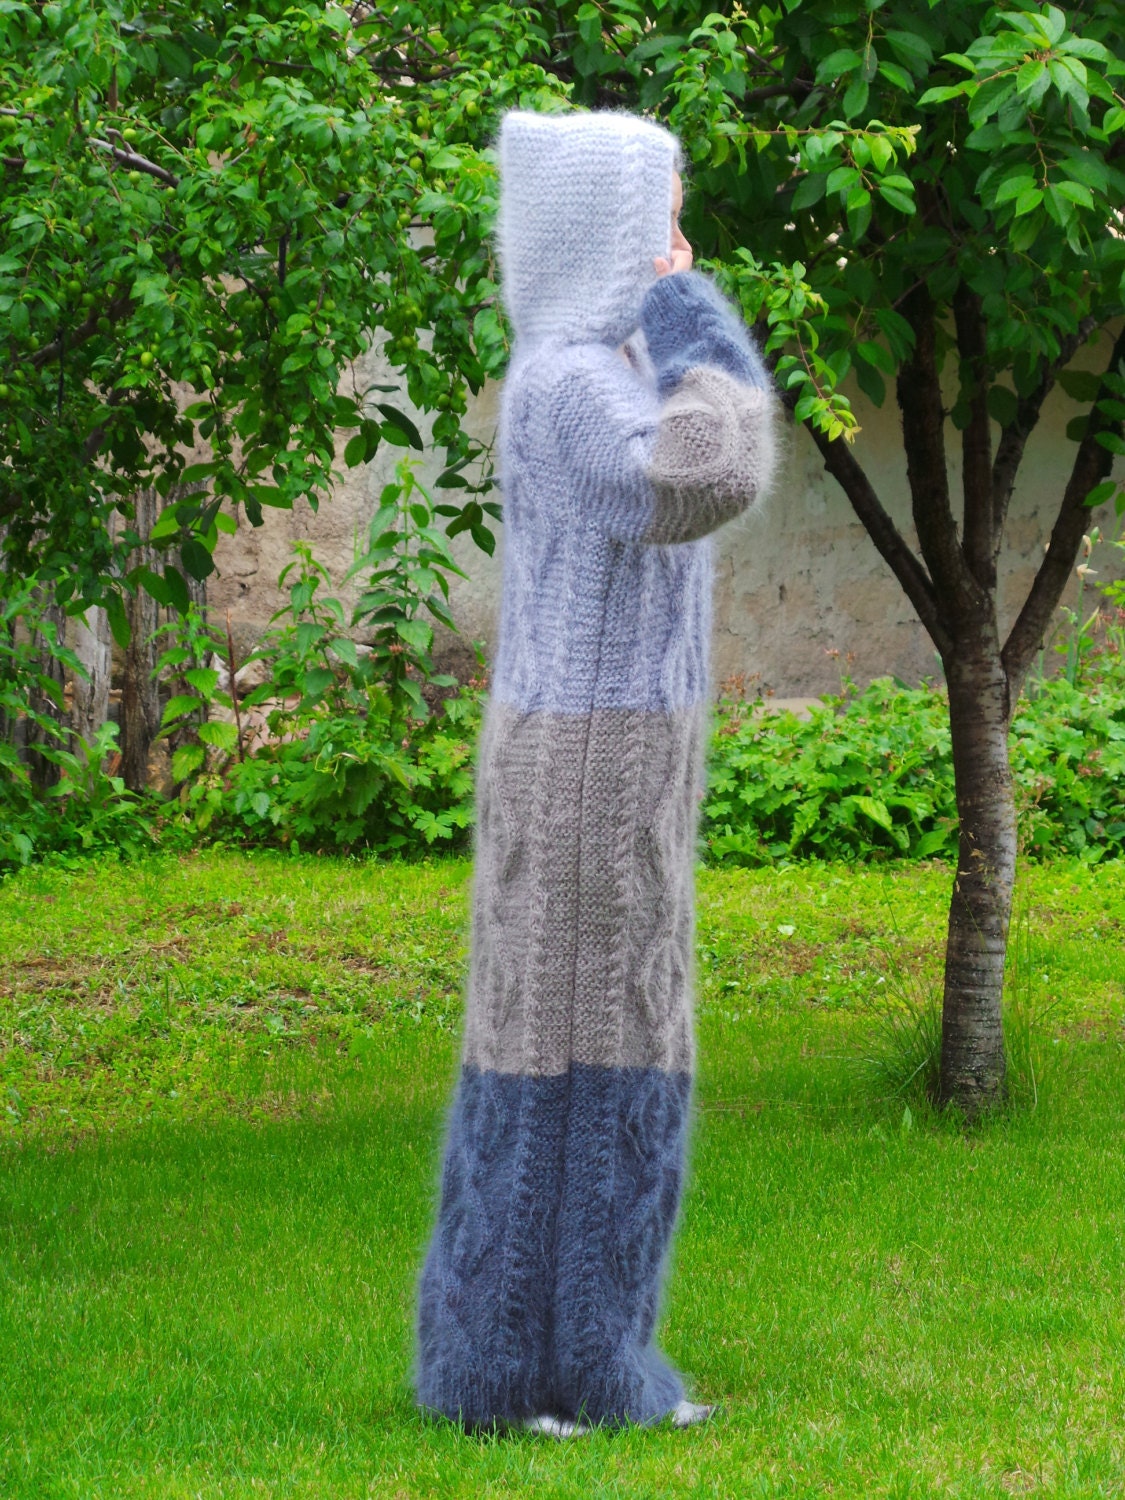 Designer Thick Hand Knit Sweater Mohair Dress Fuzzy Hooded - Etsy